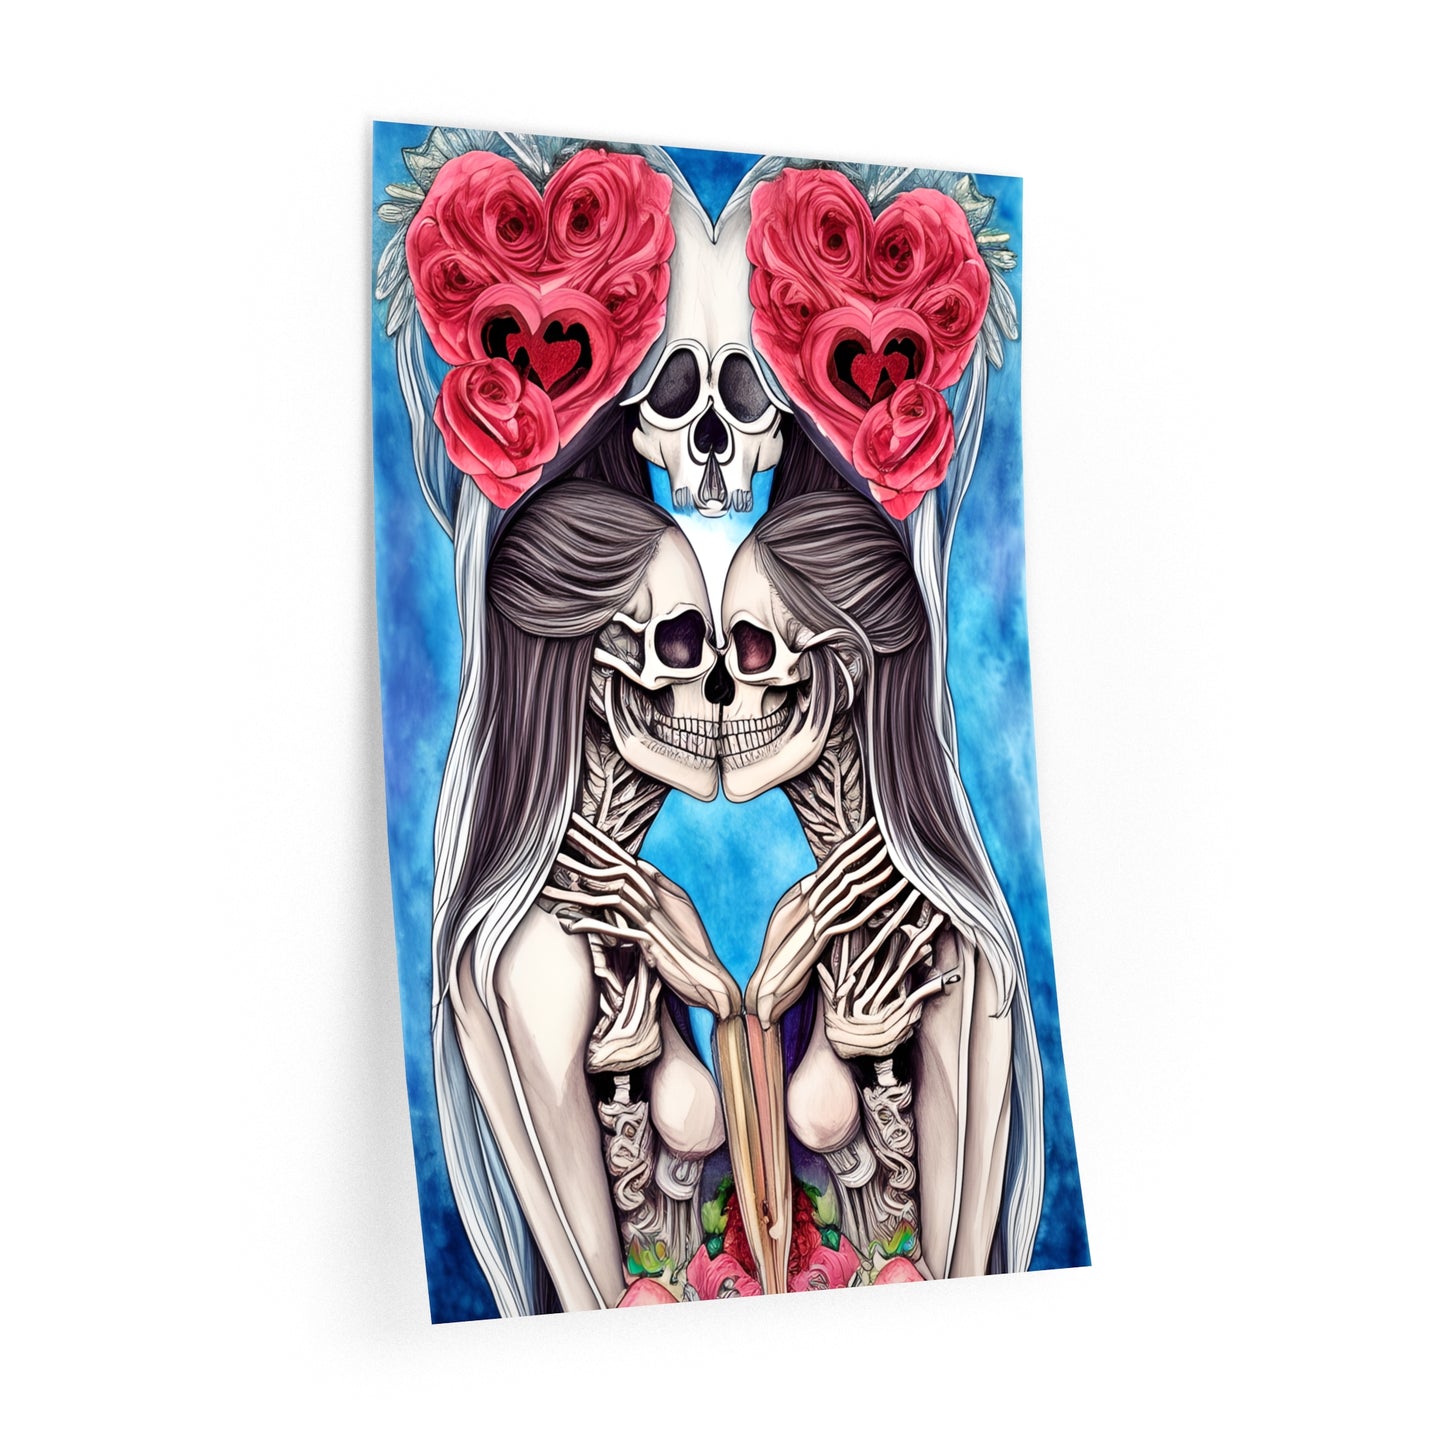 Love Shows No Time Boundaries Skulls, Image By Loewenkind Creations Wall Decals